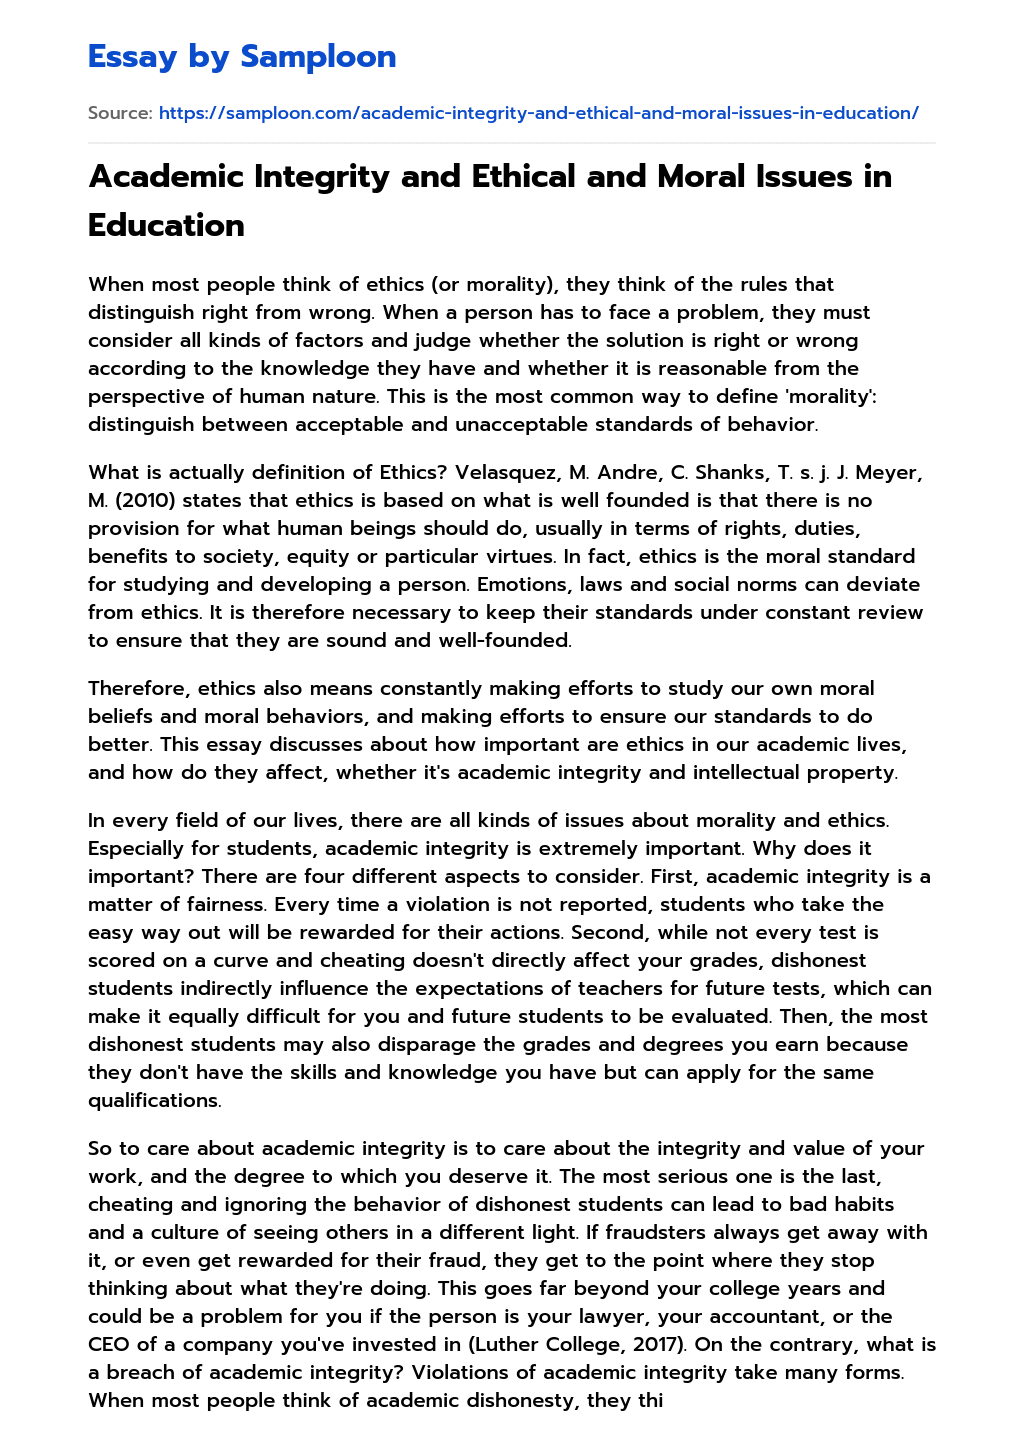 Academic Integrity and Ethical and Moral Issues in Education essay